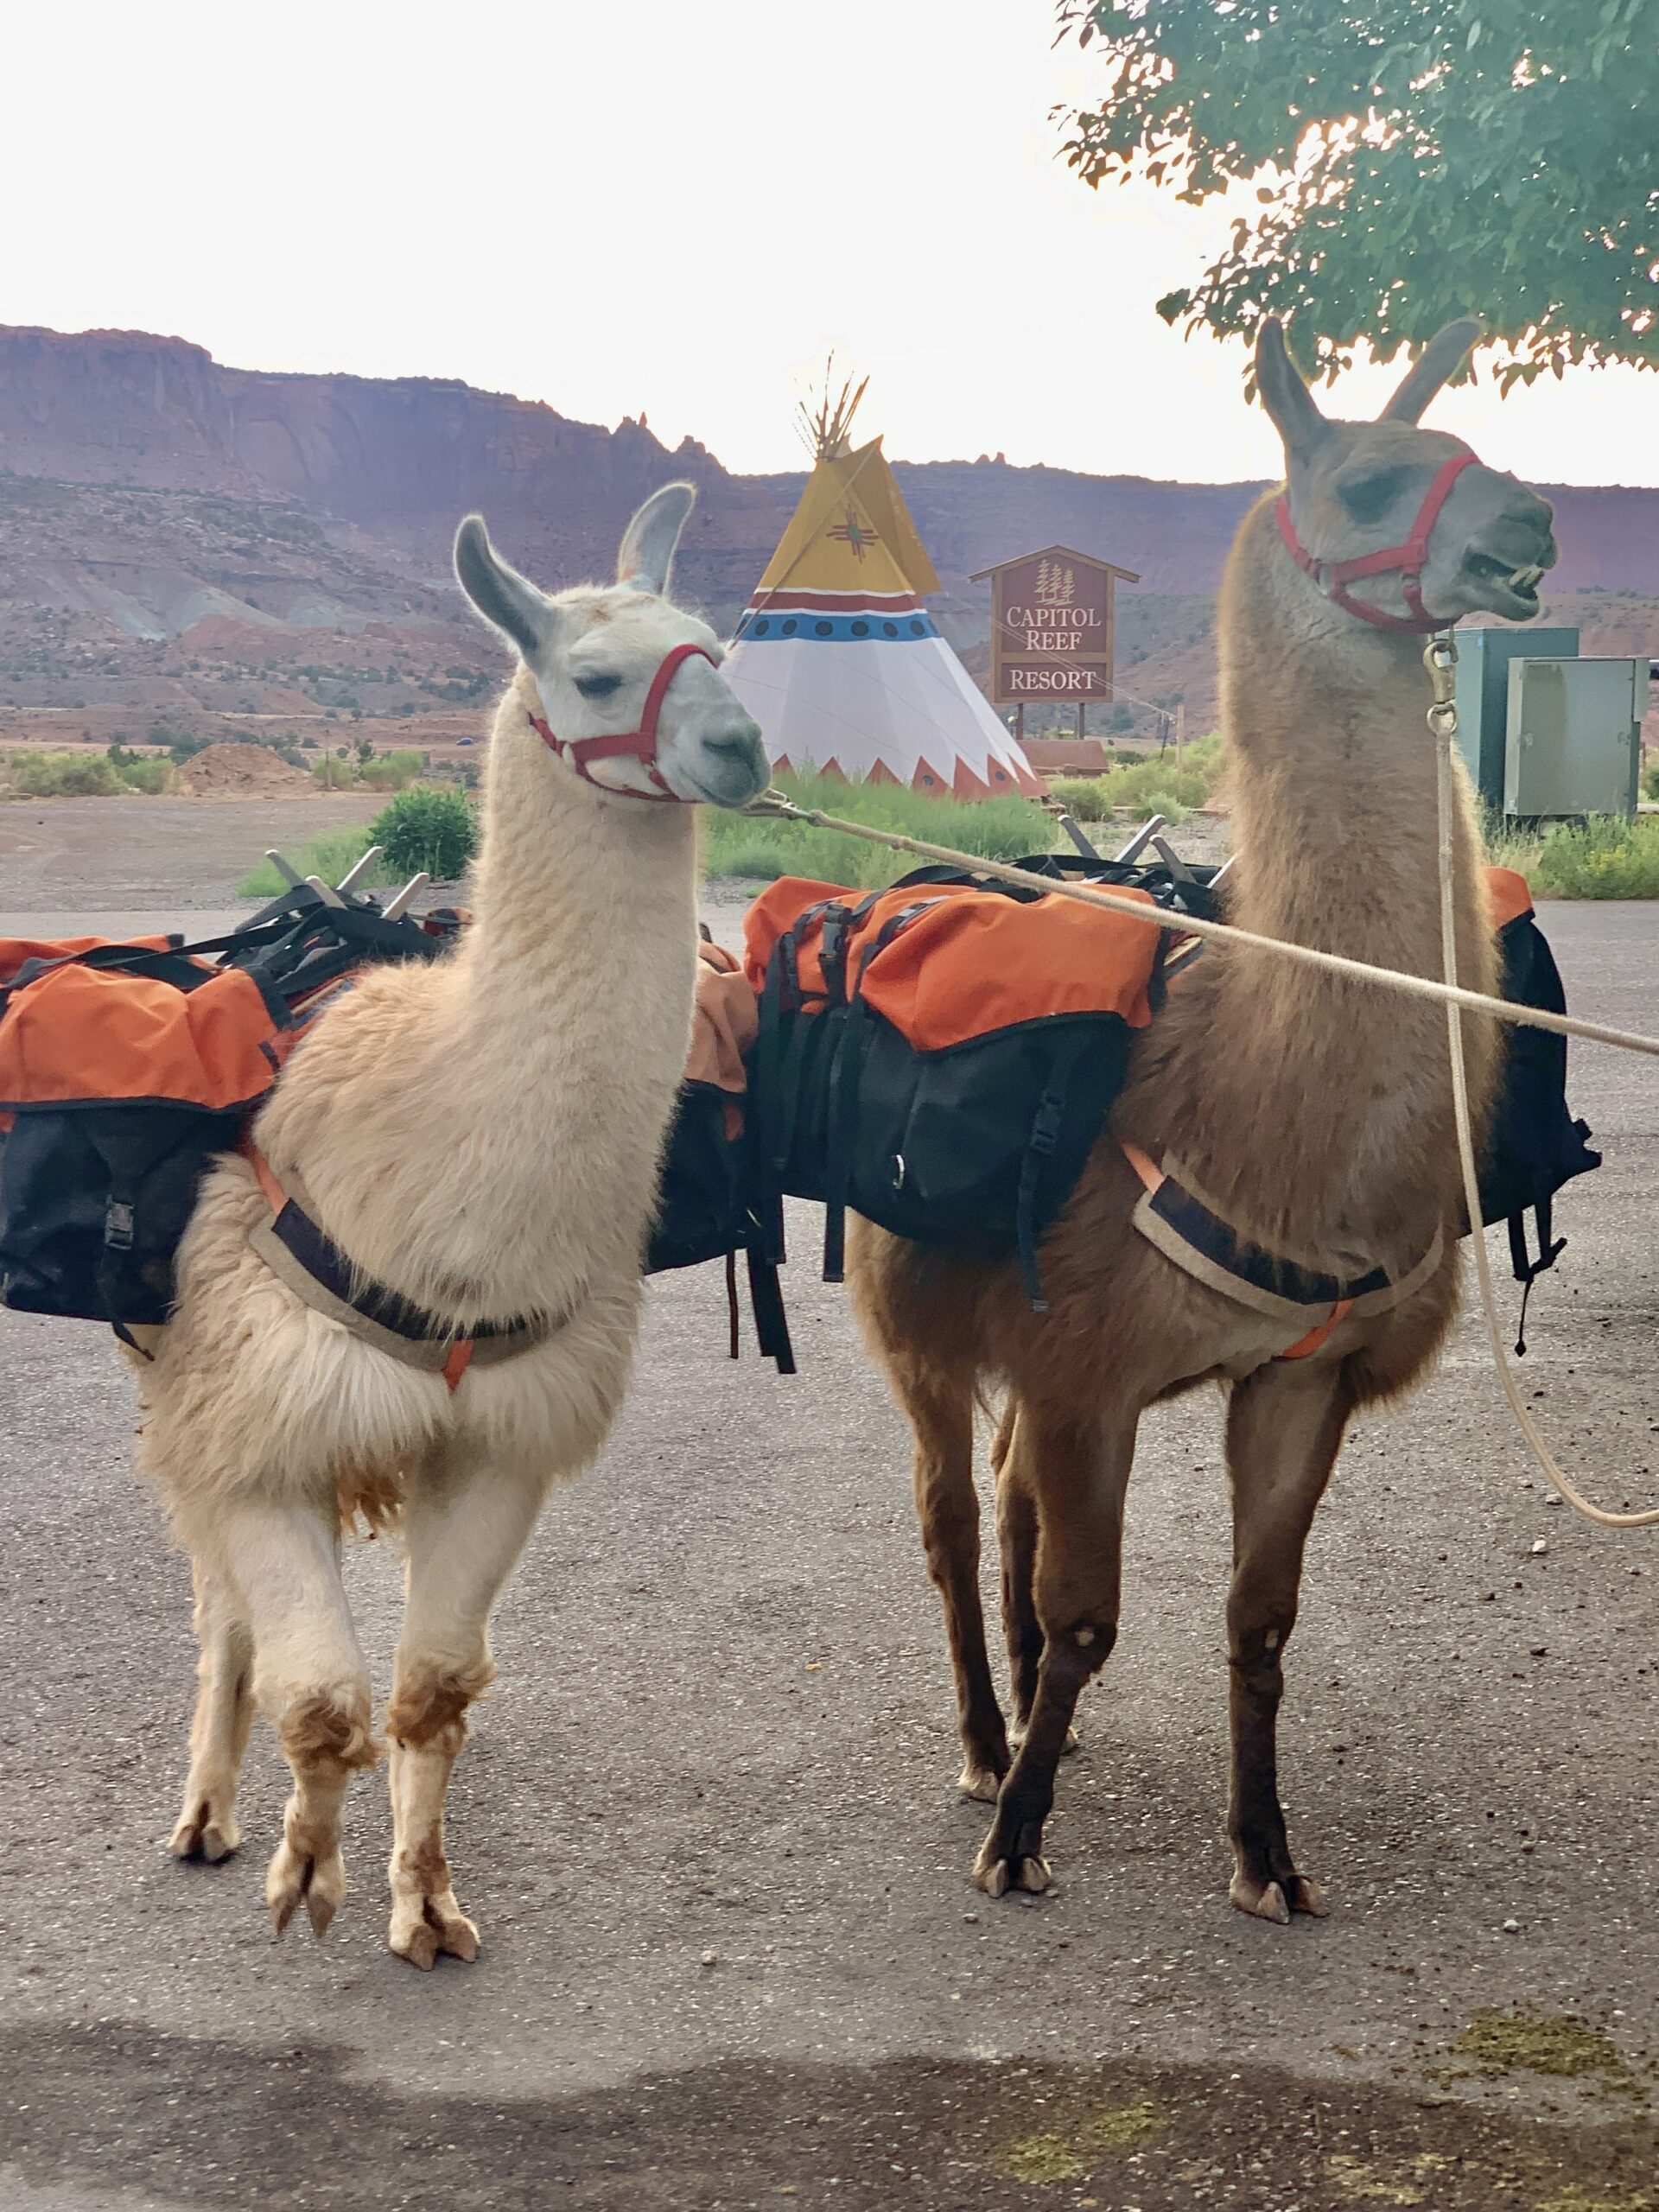 Llamas packed up for a hike with some guests